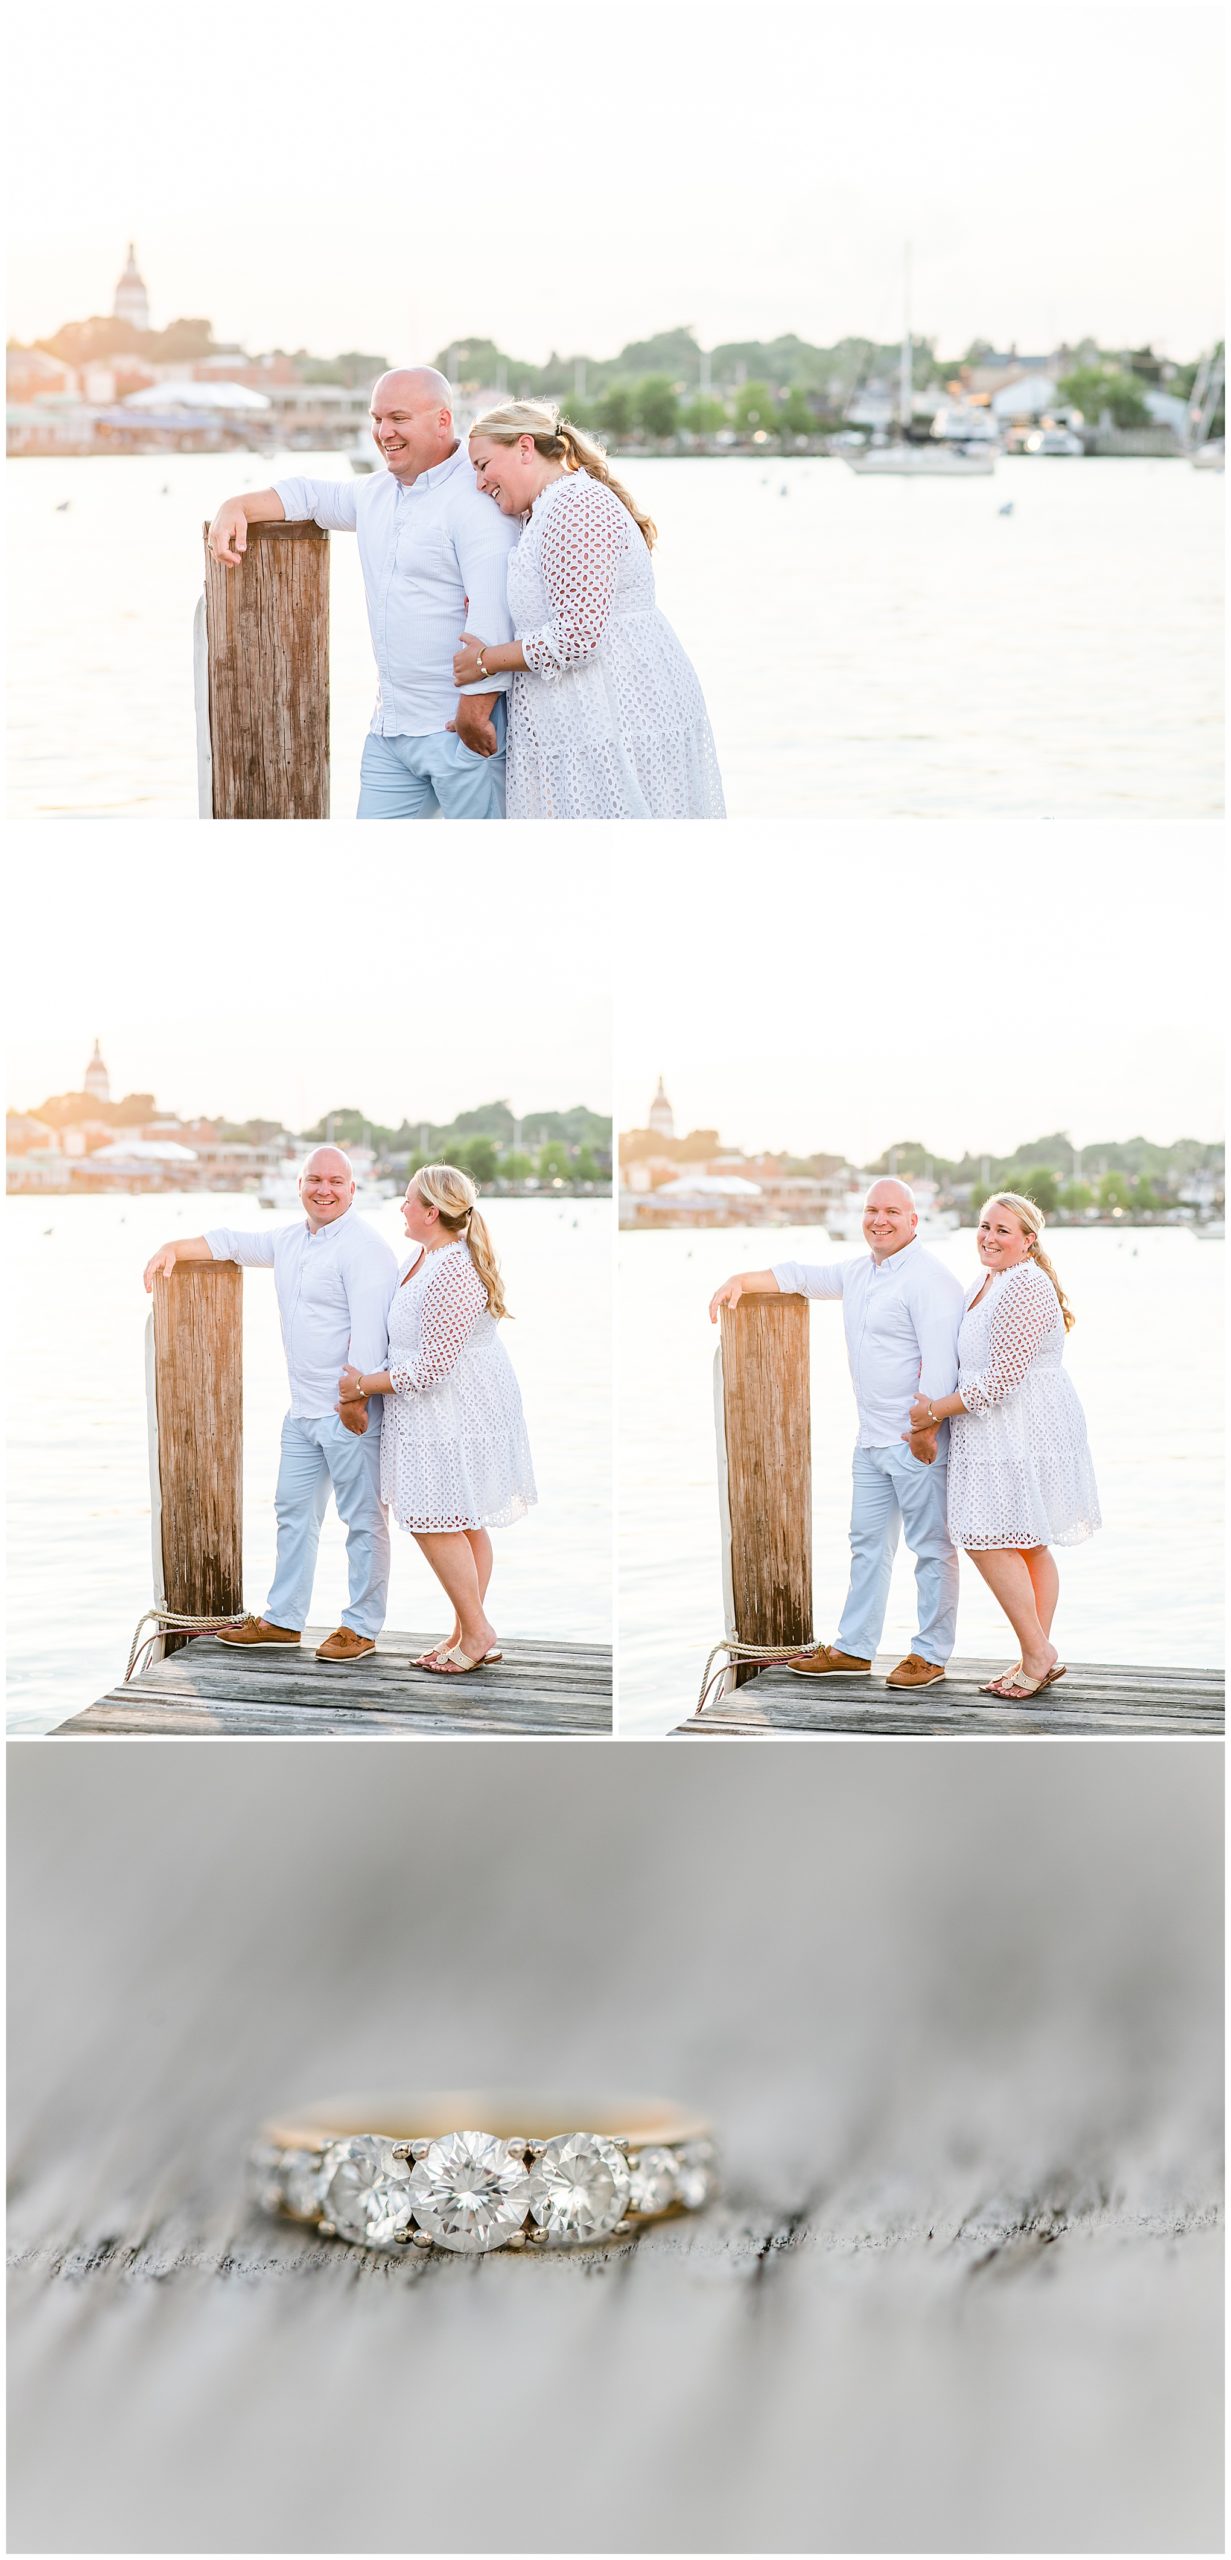 late spring Annapolis engagement photos, nautical engagement photos, Annapolis Maryland, Maryland engagement photos, MD wedding photographer, MD engagement photos, all American engagement photos, downtown Annapolis engagement photos, Annapolis photographer, Rachel E.H. Photography, summer engagement photos, casual engagement photos